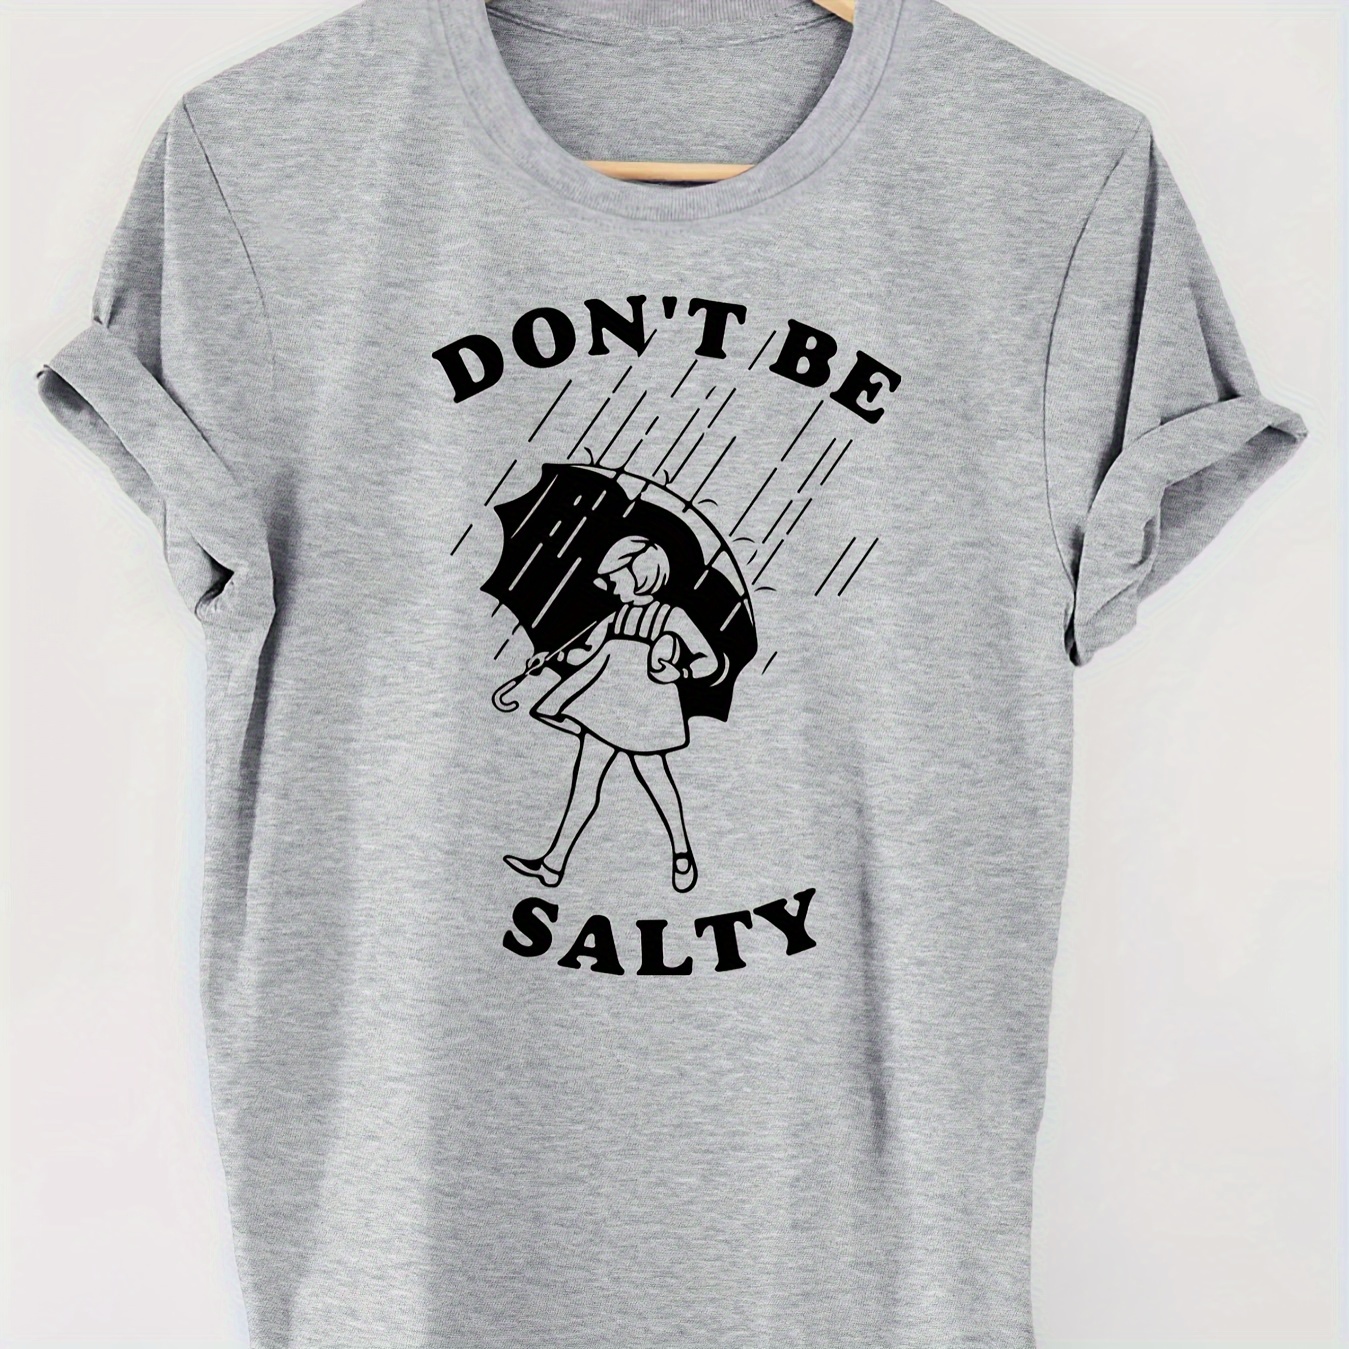 

Don't Be Salty Letter Print T-shirt, Short Sleeve Crew Neck Casual Top For Summer & Spring, Women's Clothing